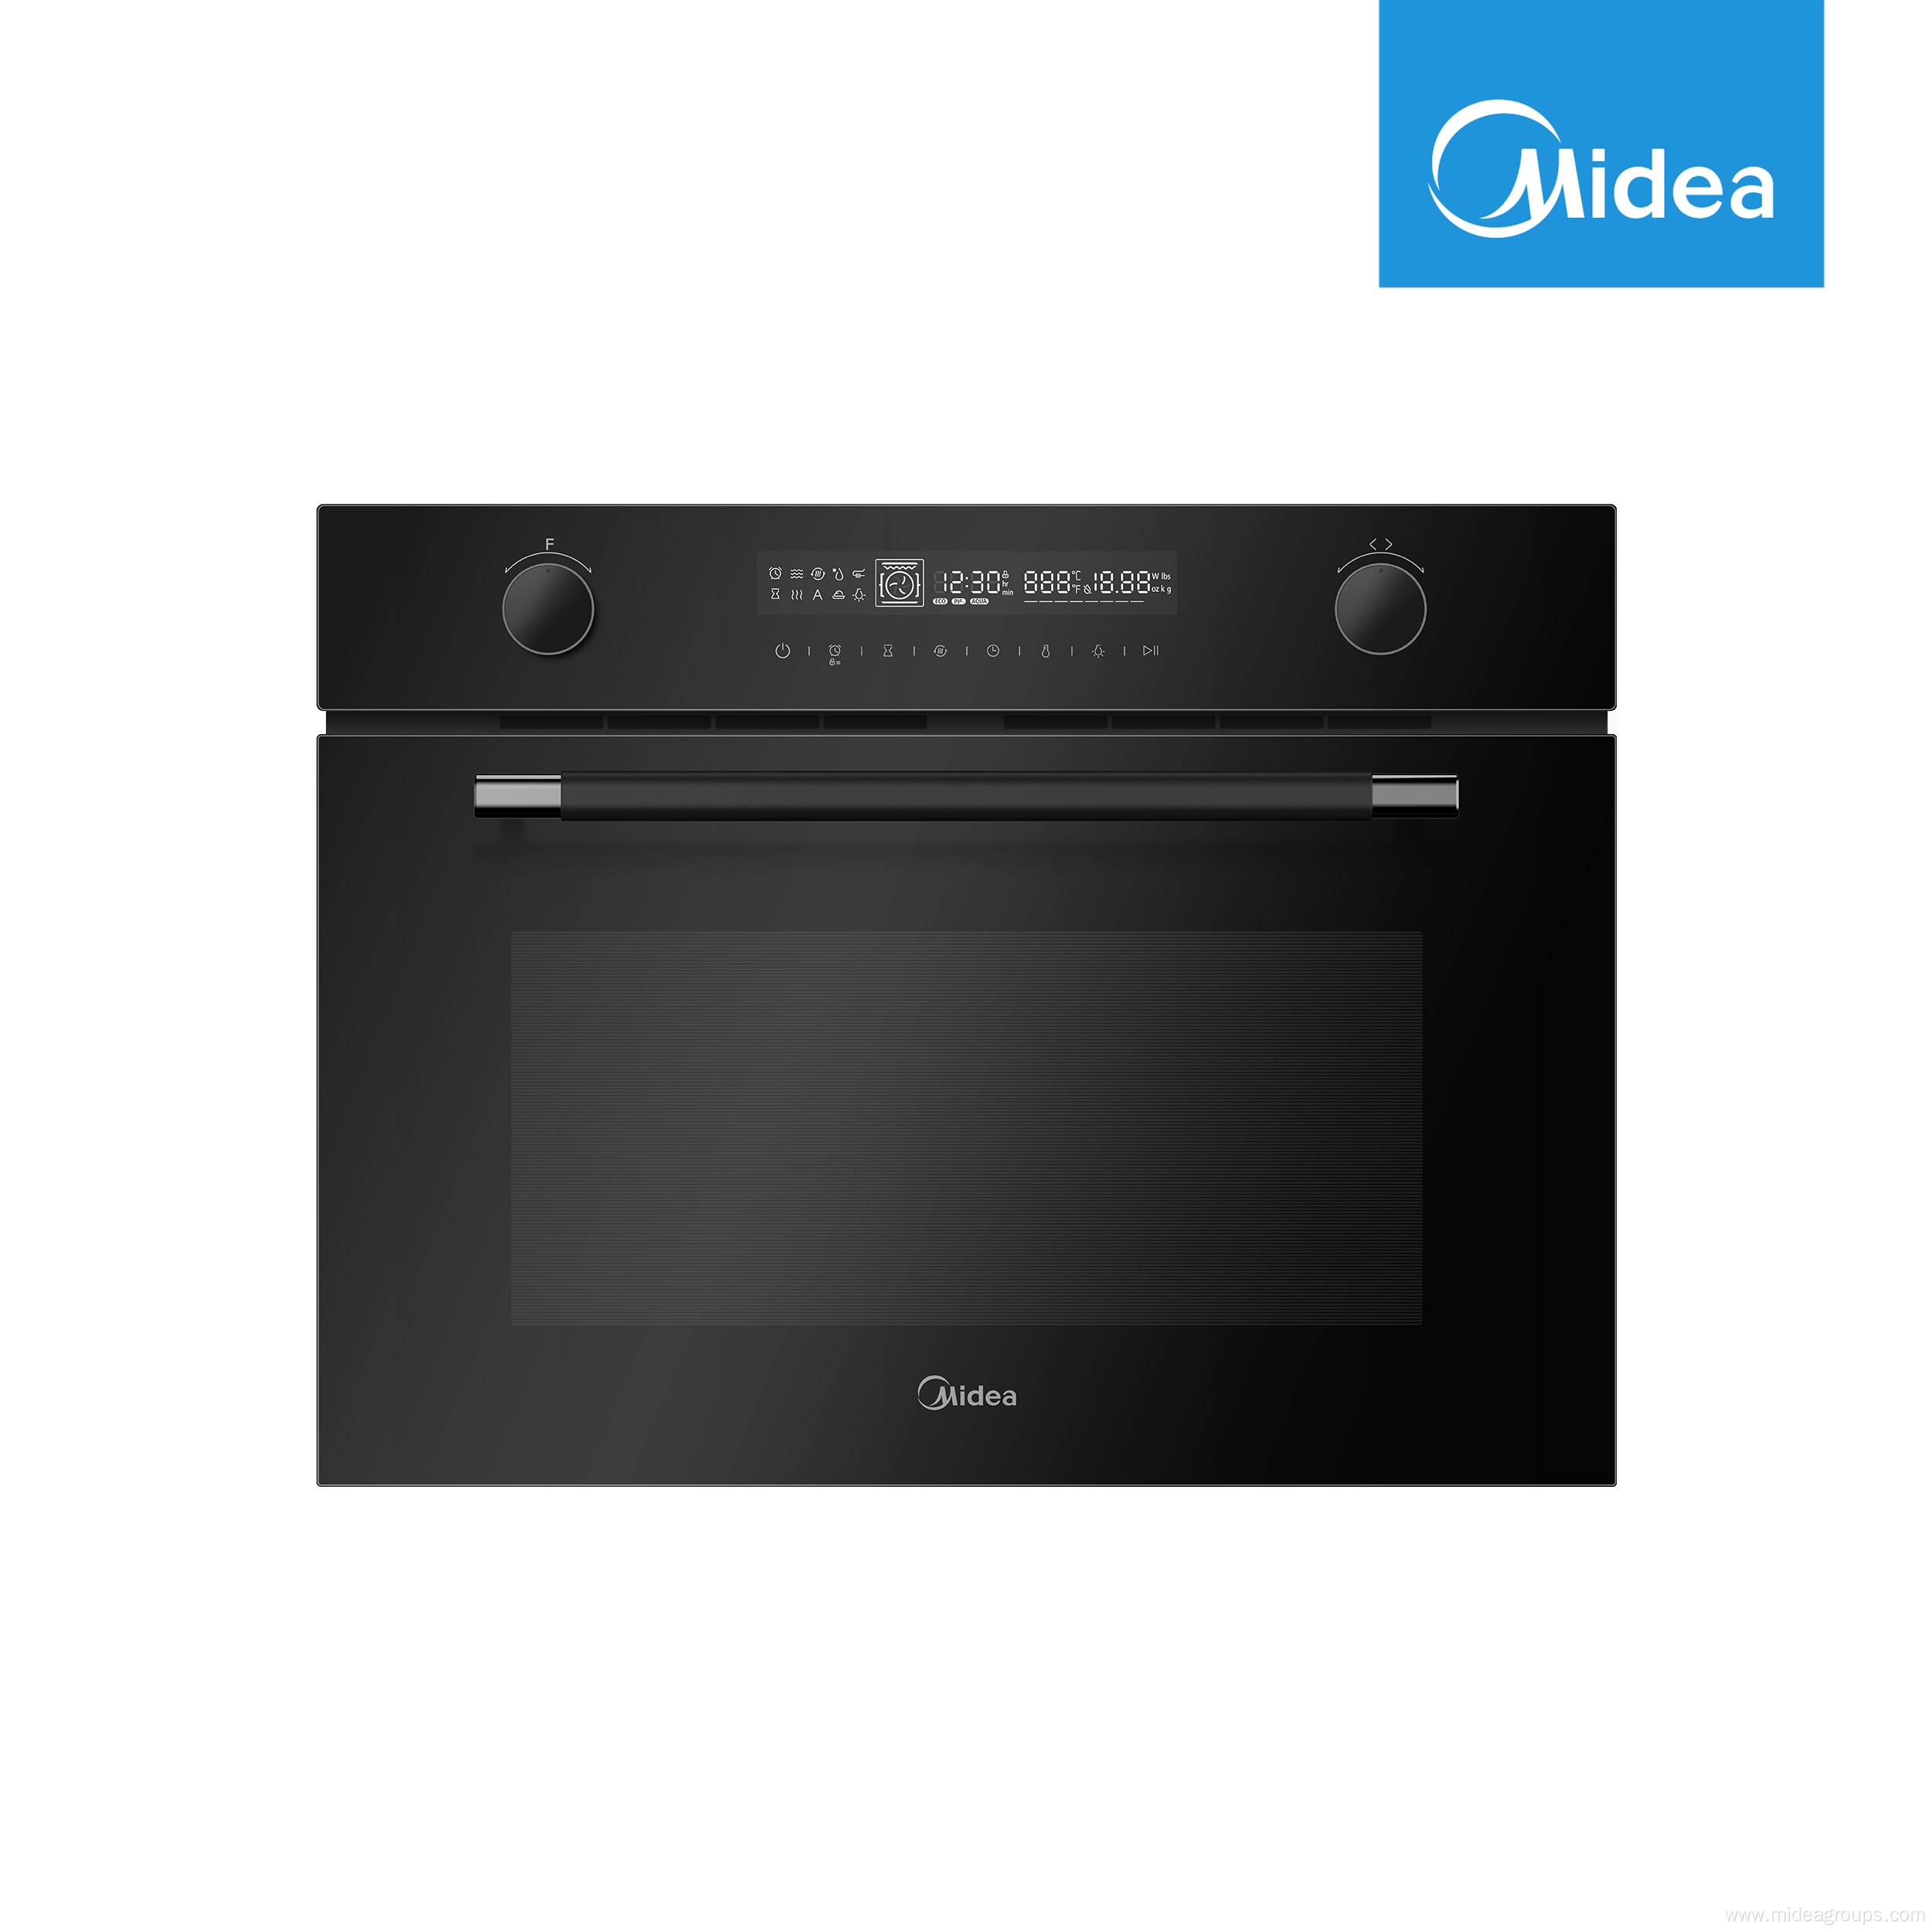 45cm Built-in Compact Oven with Microwave Function